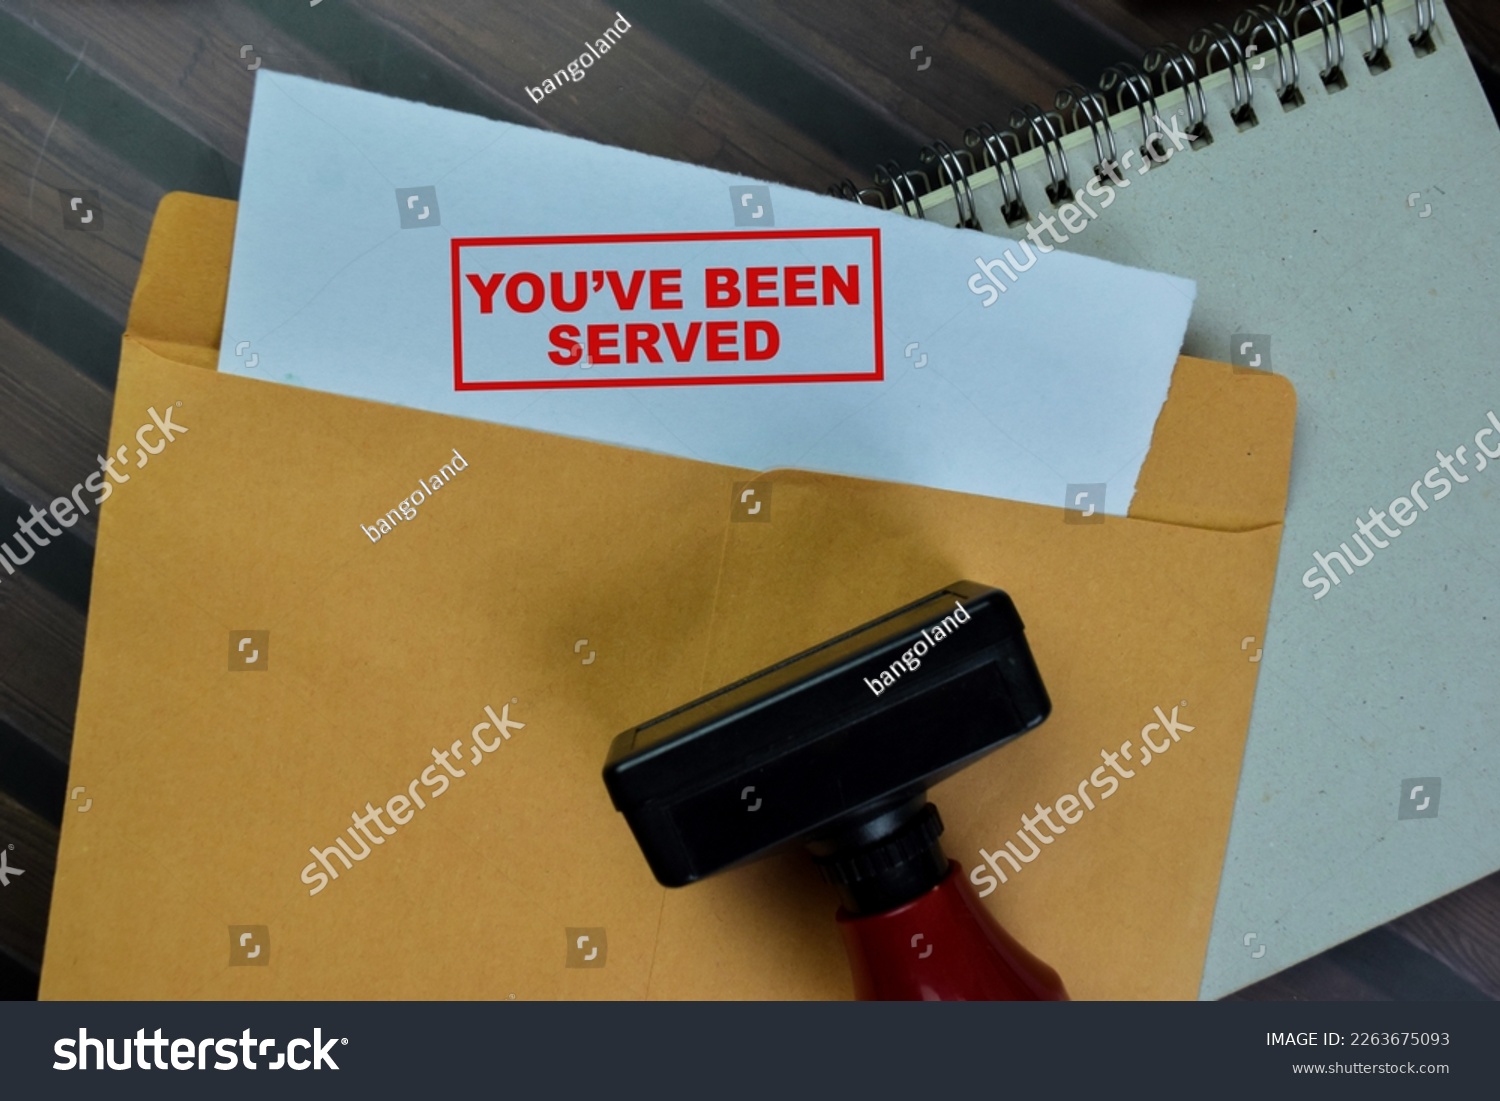 Concept of Red Handle Rubber Stamper and You've been Served text above from brown envelope isolated on on Wooden Table. #2263675093